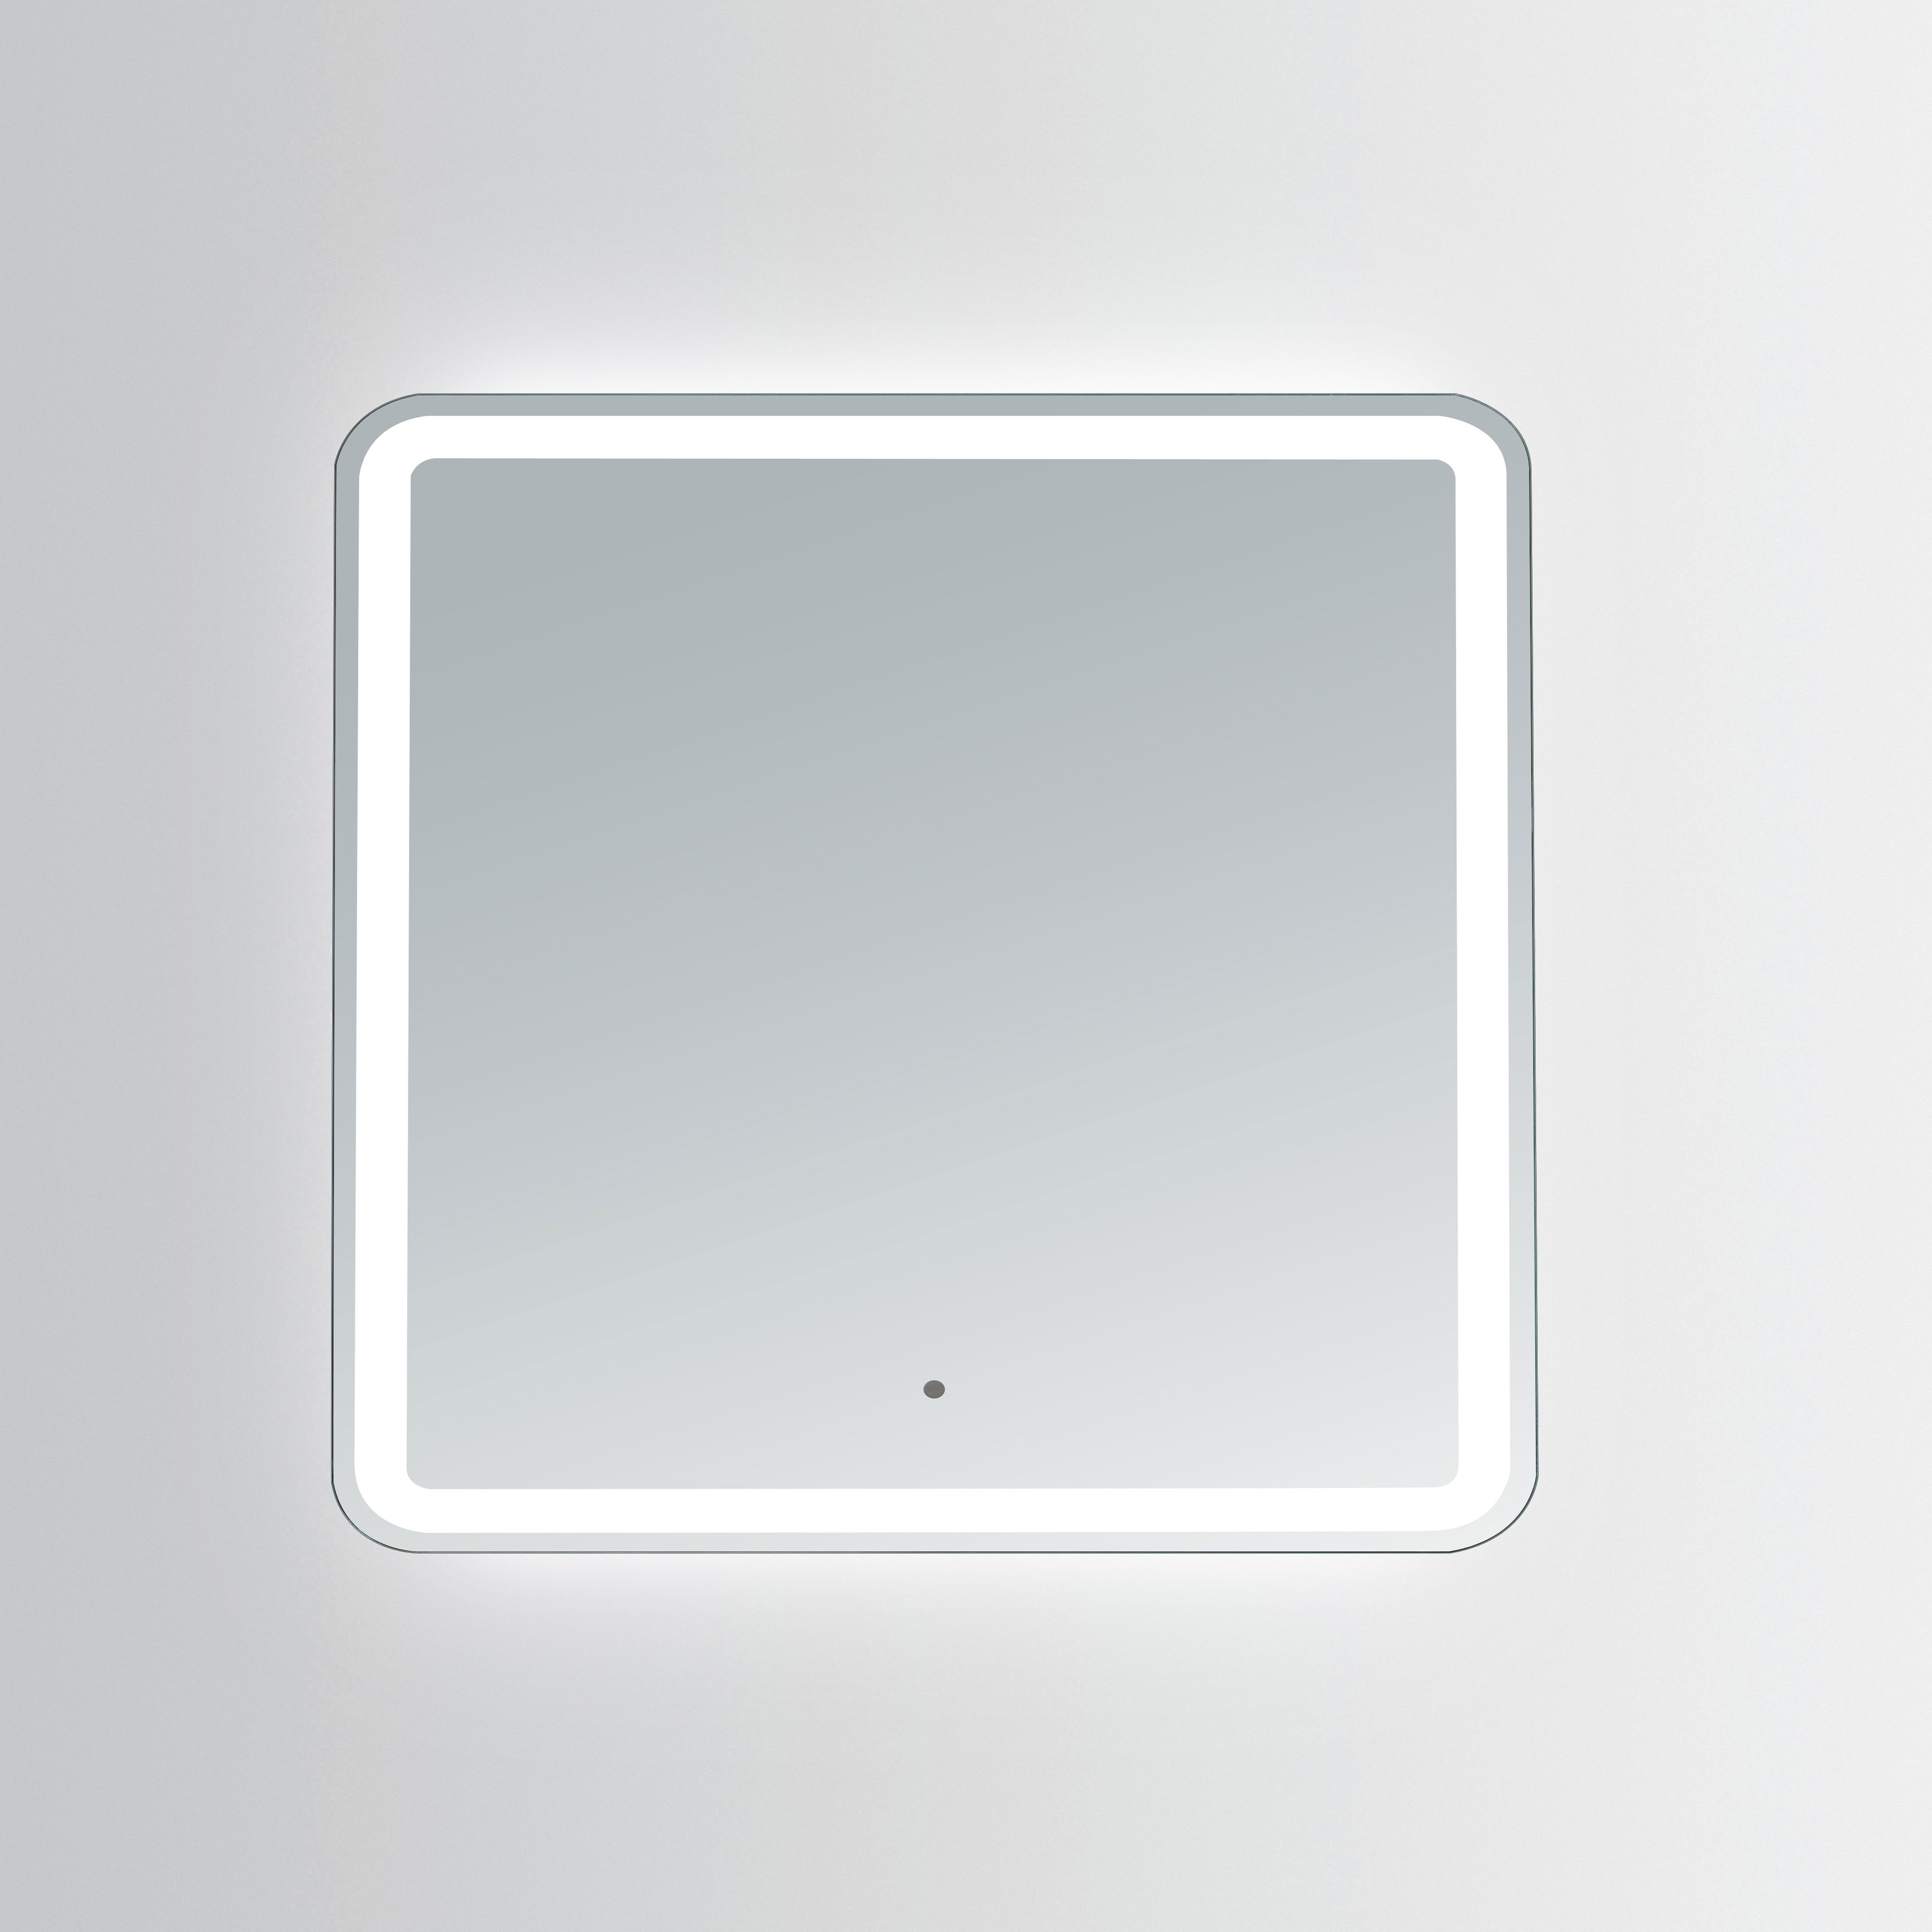 innoci-usa Hermes Round Corner LED Mirror with Touchless Control